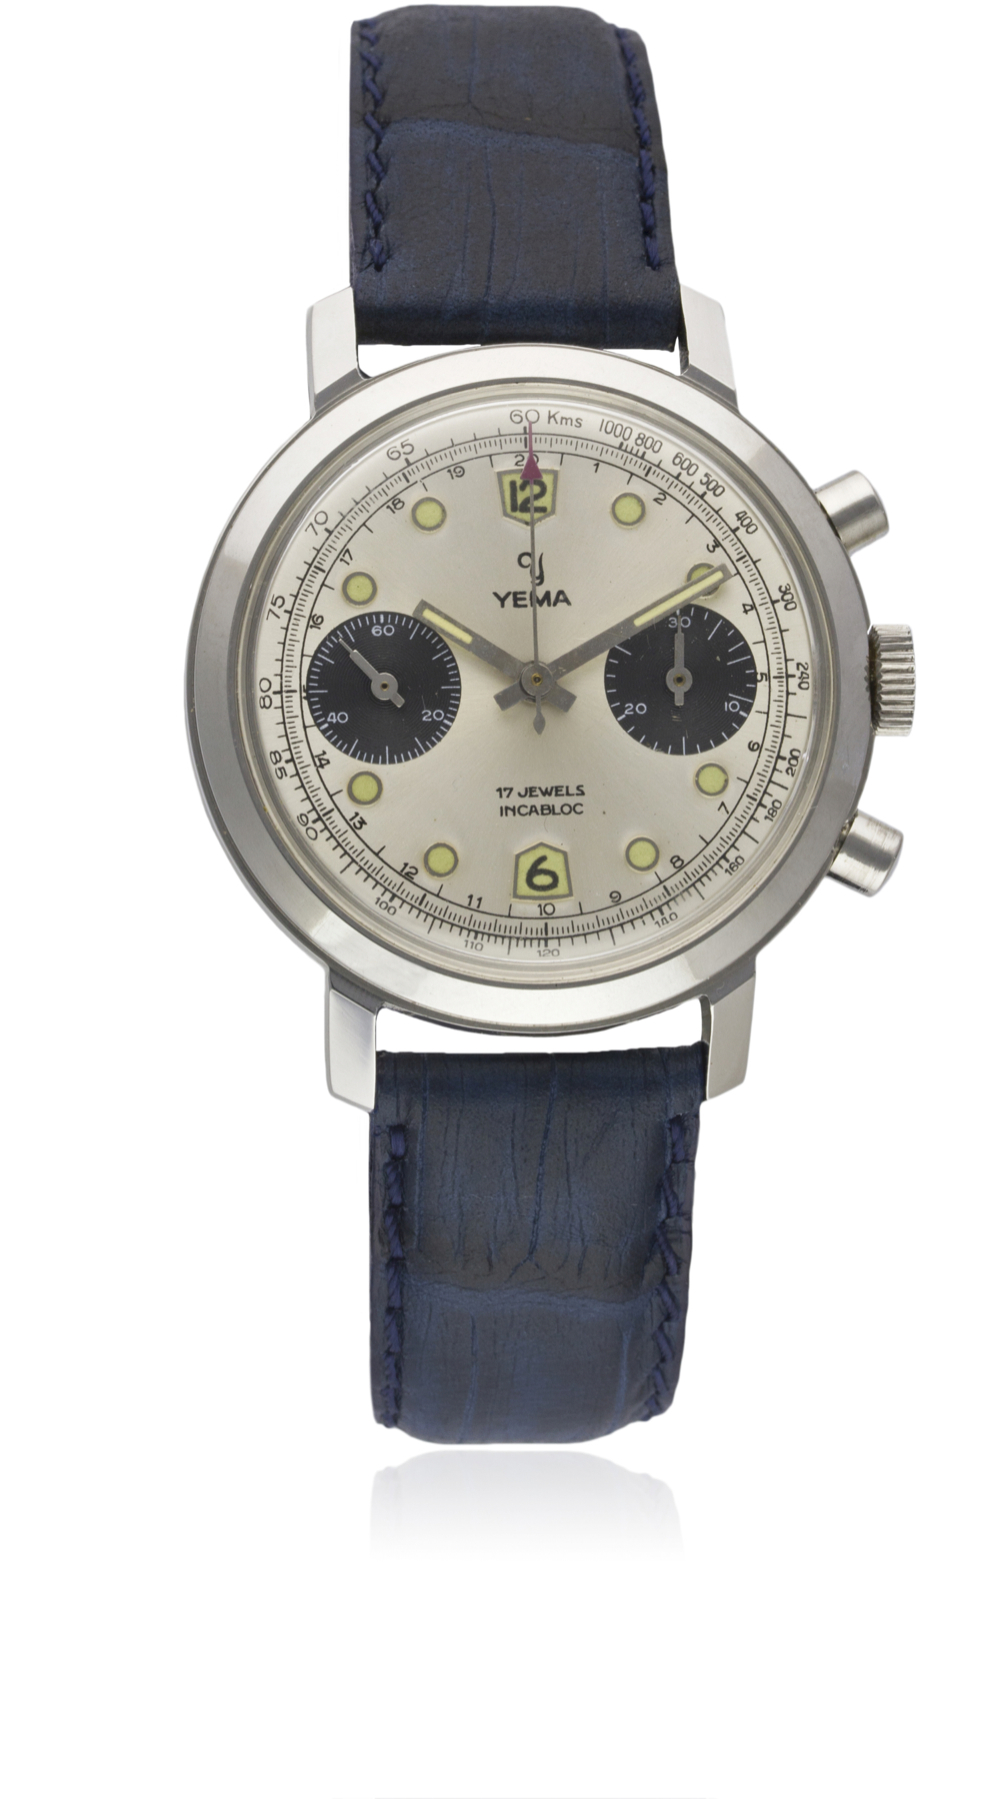 A GENTLEMAN'S STAINLESS STEEL YEMA CHRONOGRAPH WRIST WATCH  CIRCA 1970, WITH "PANDA" DIAL - Image 2 of 2